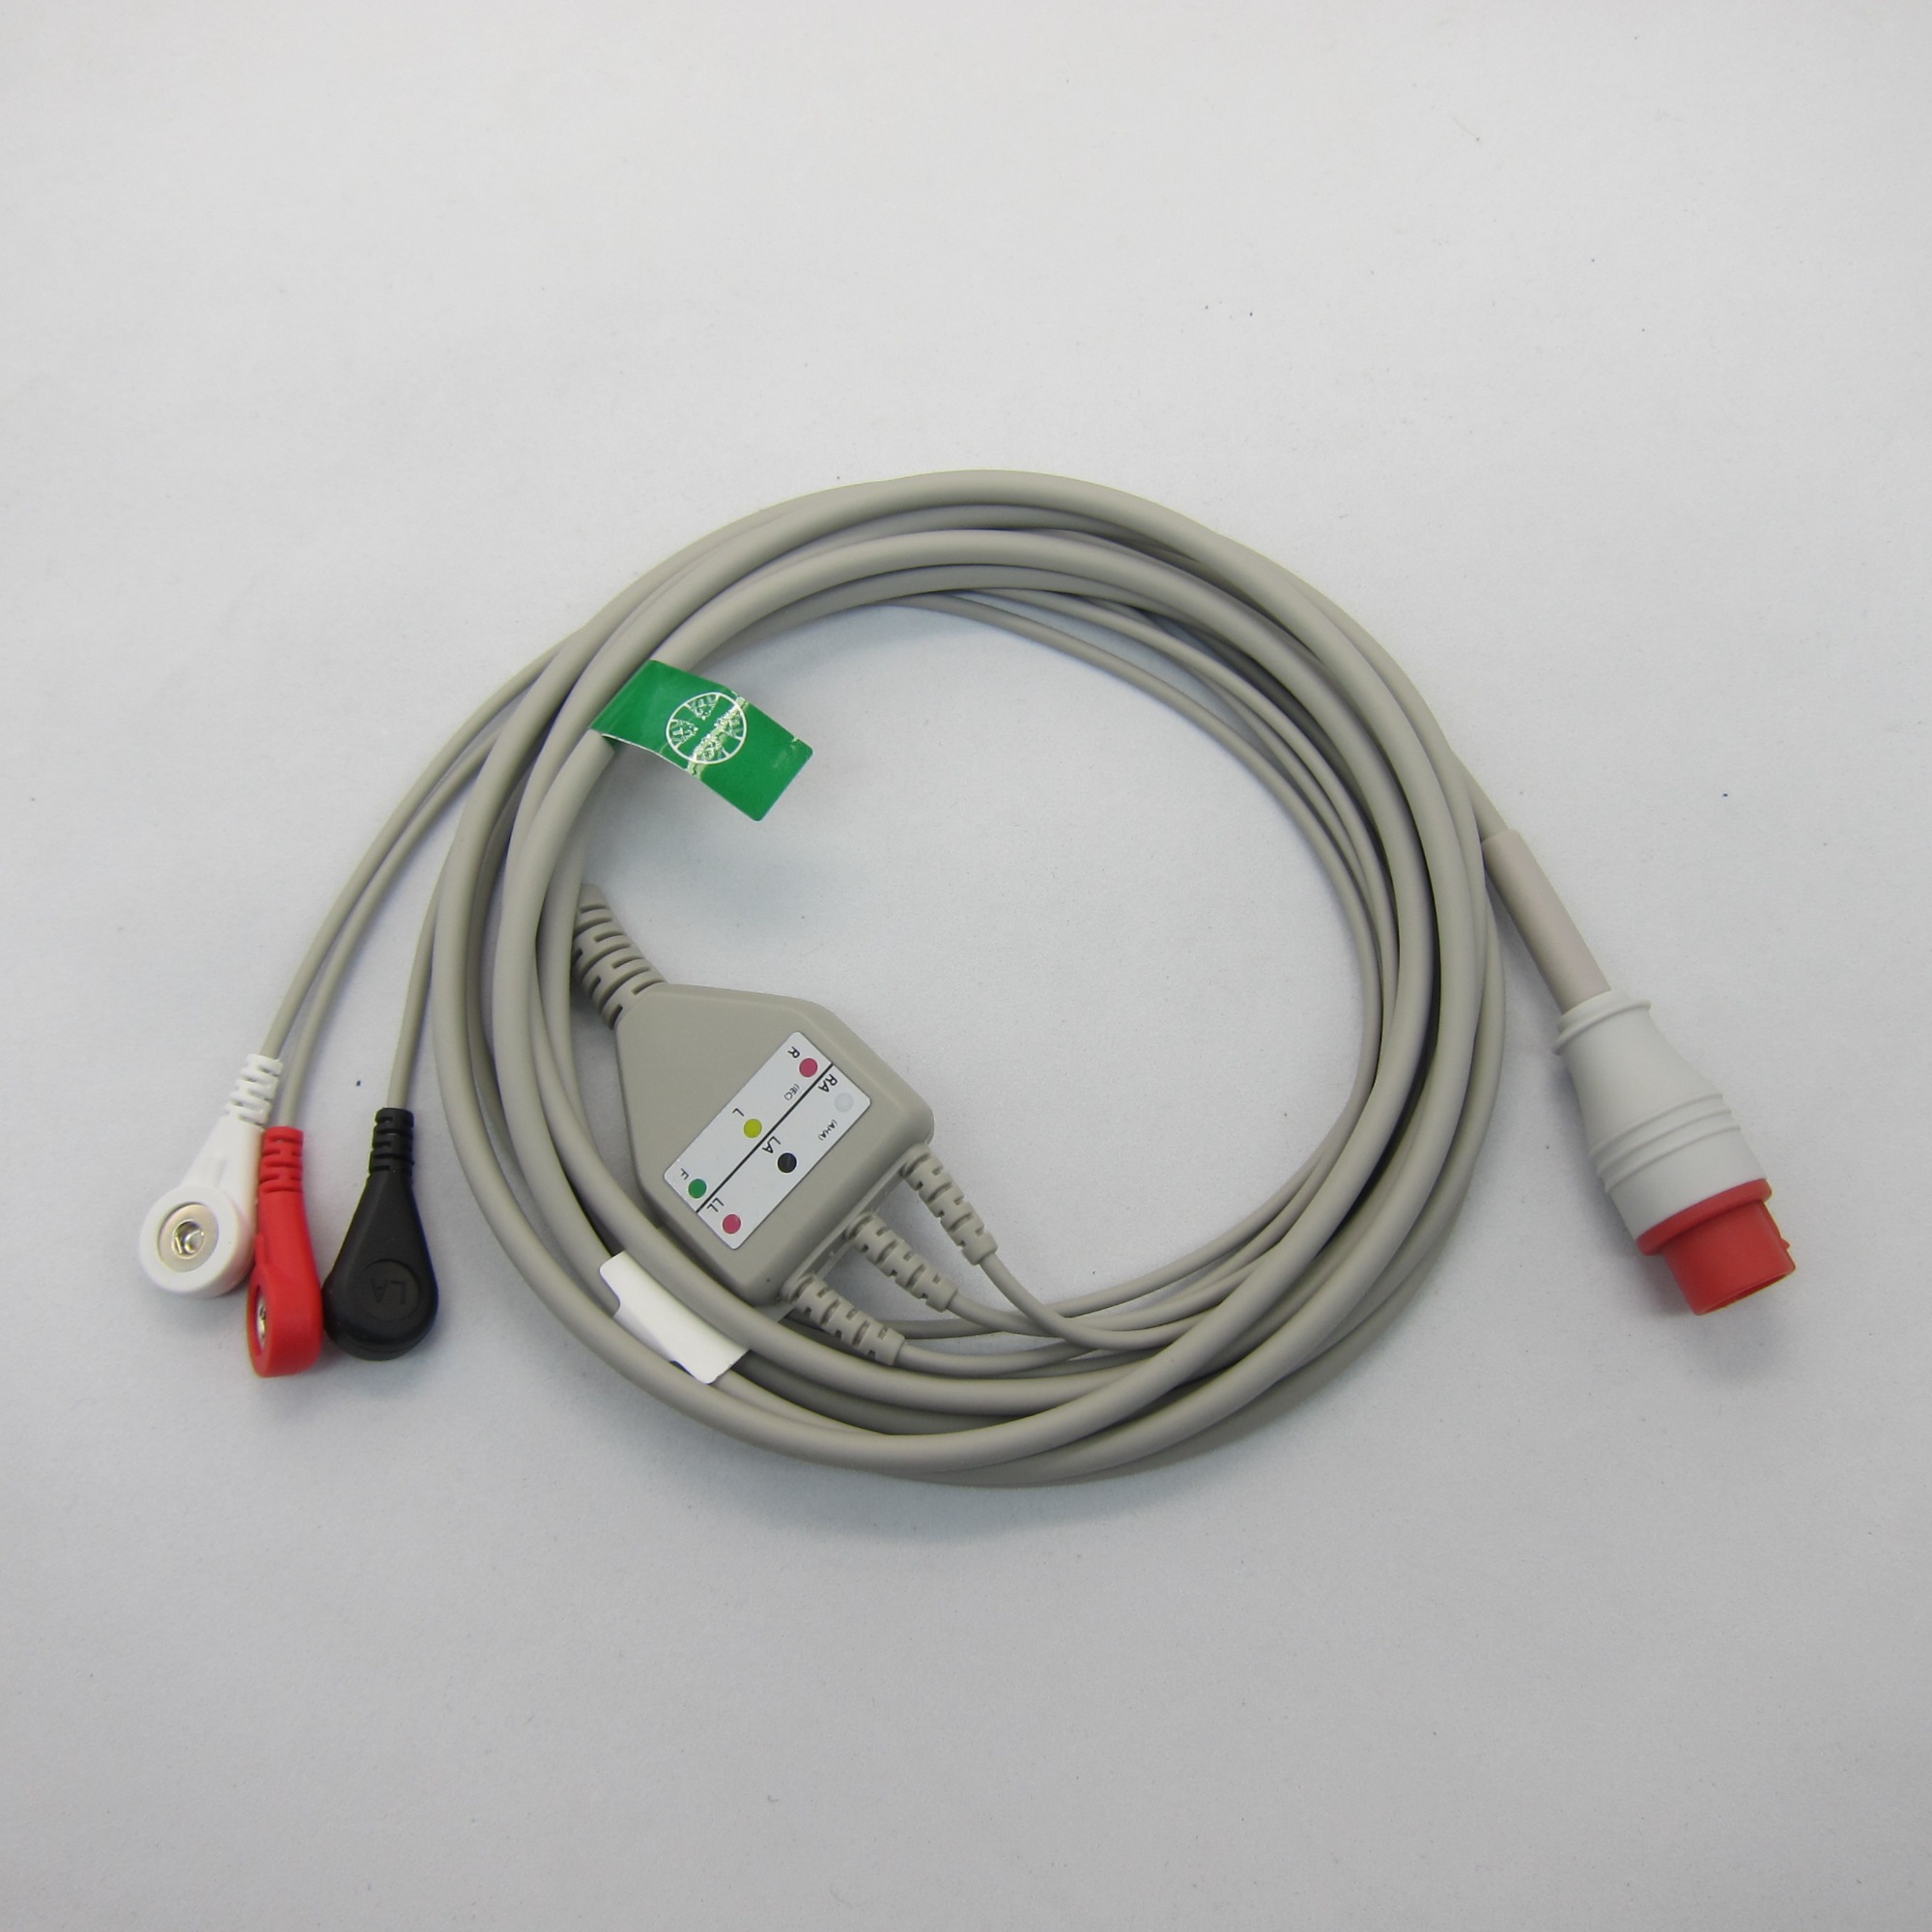 One-piece 3 or 5 Leads Snap Or Clip ECG cable and leadwires for Bionet BM3